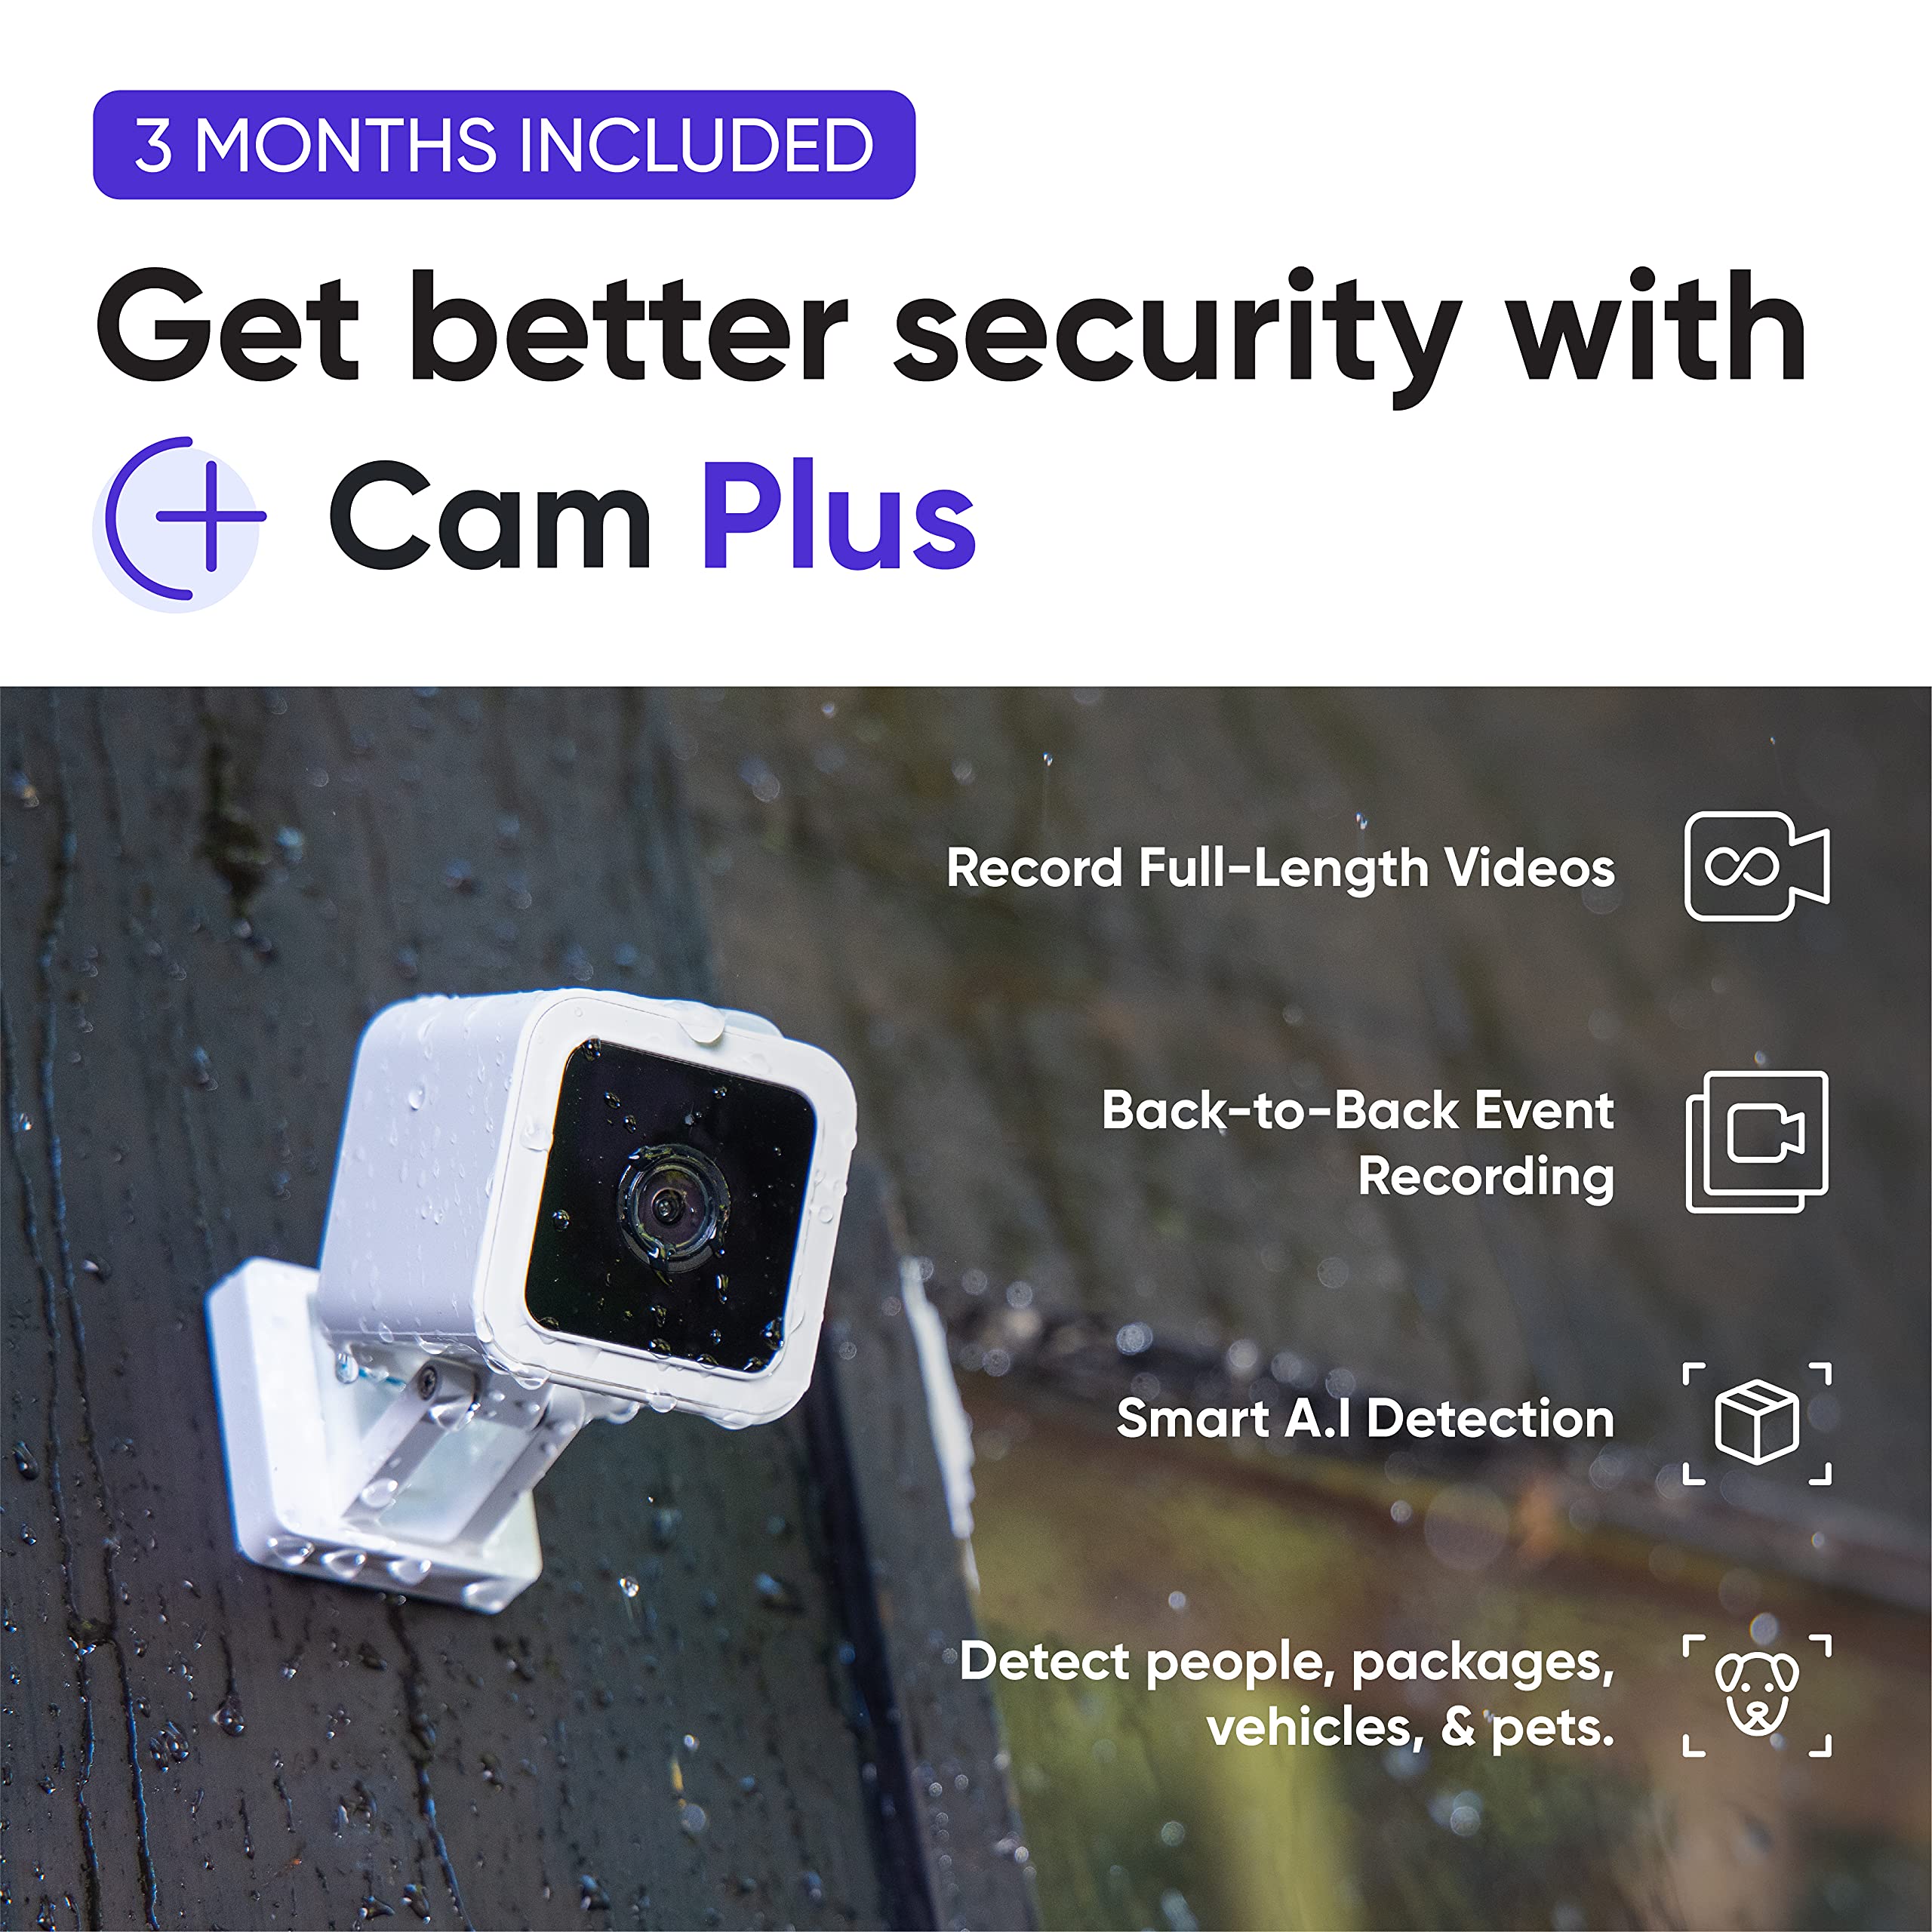 Wyze Cam v3 1080p HD Indoor/Outdoor Video Camera with Color Night Viewing, 2-Way Audio, Compatible with Alexa & The Google Assistant and IFTTT with Wyze Cam Plus 3 Month Subscription